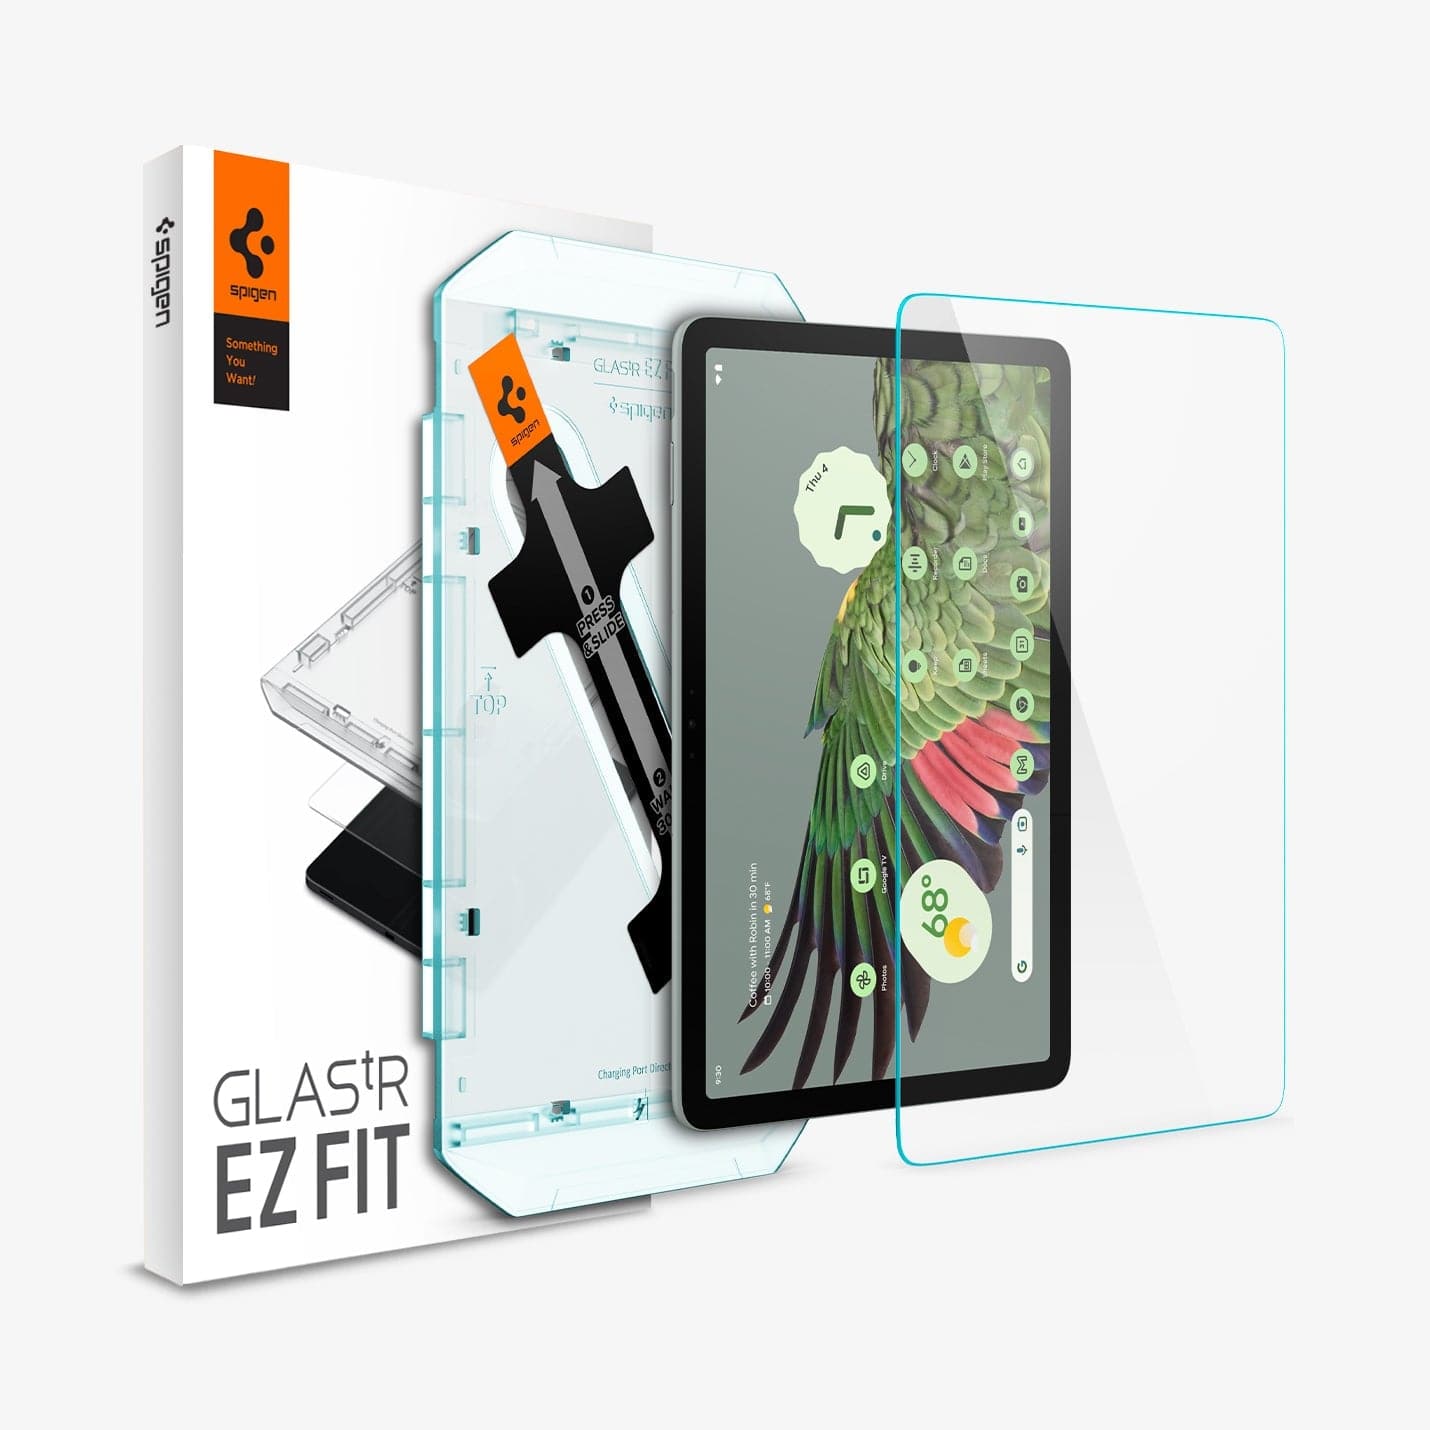 AGL06855 - Pixel Tablet Screen Protector EZ FIT GLAS.tR showing the device, screen protector, ez fit tray and packaging